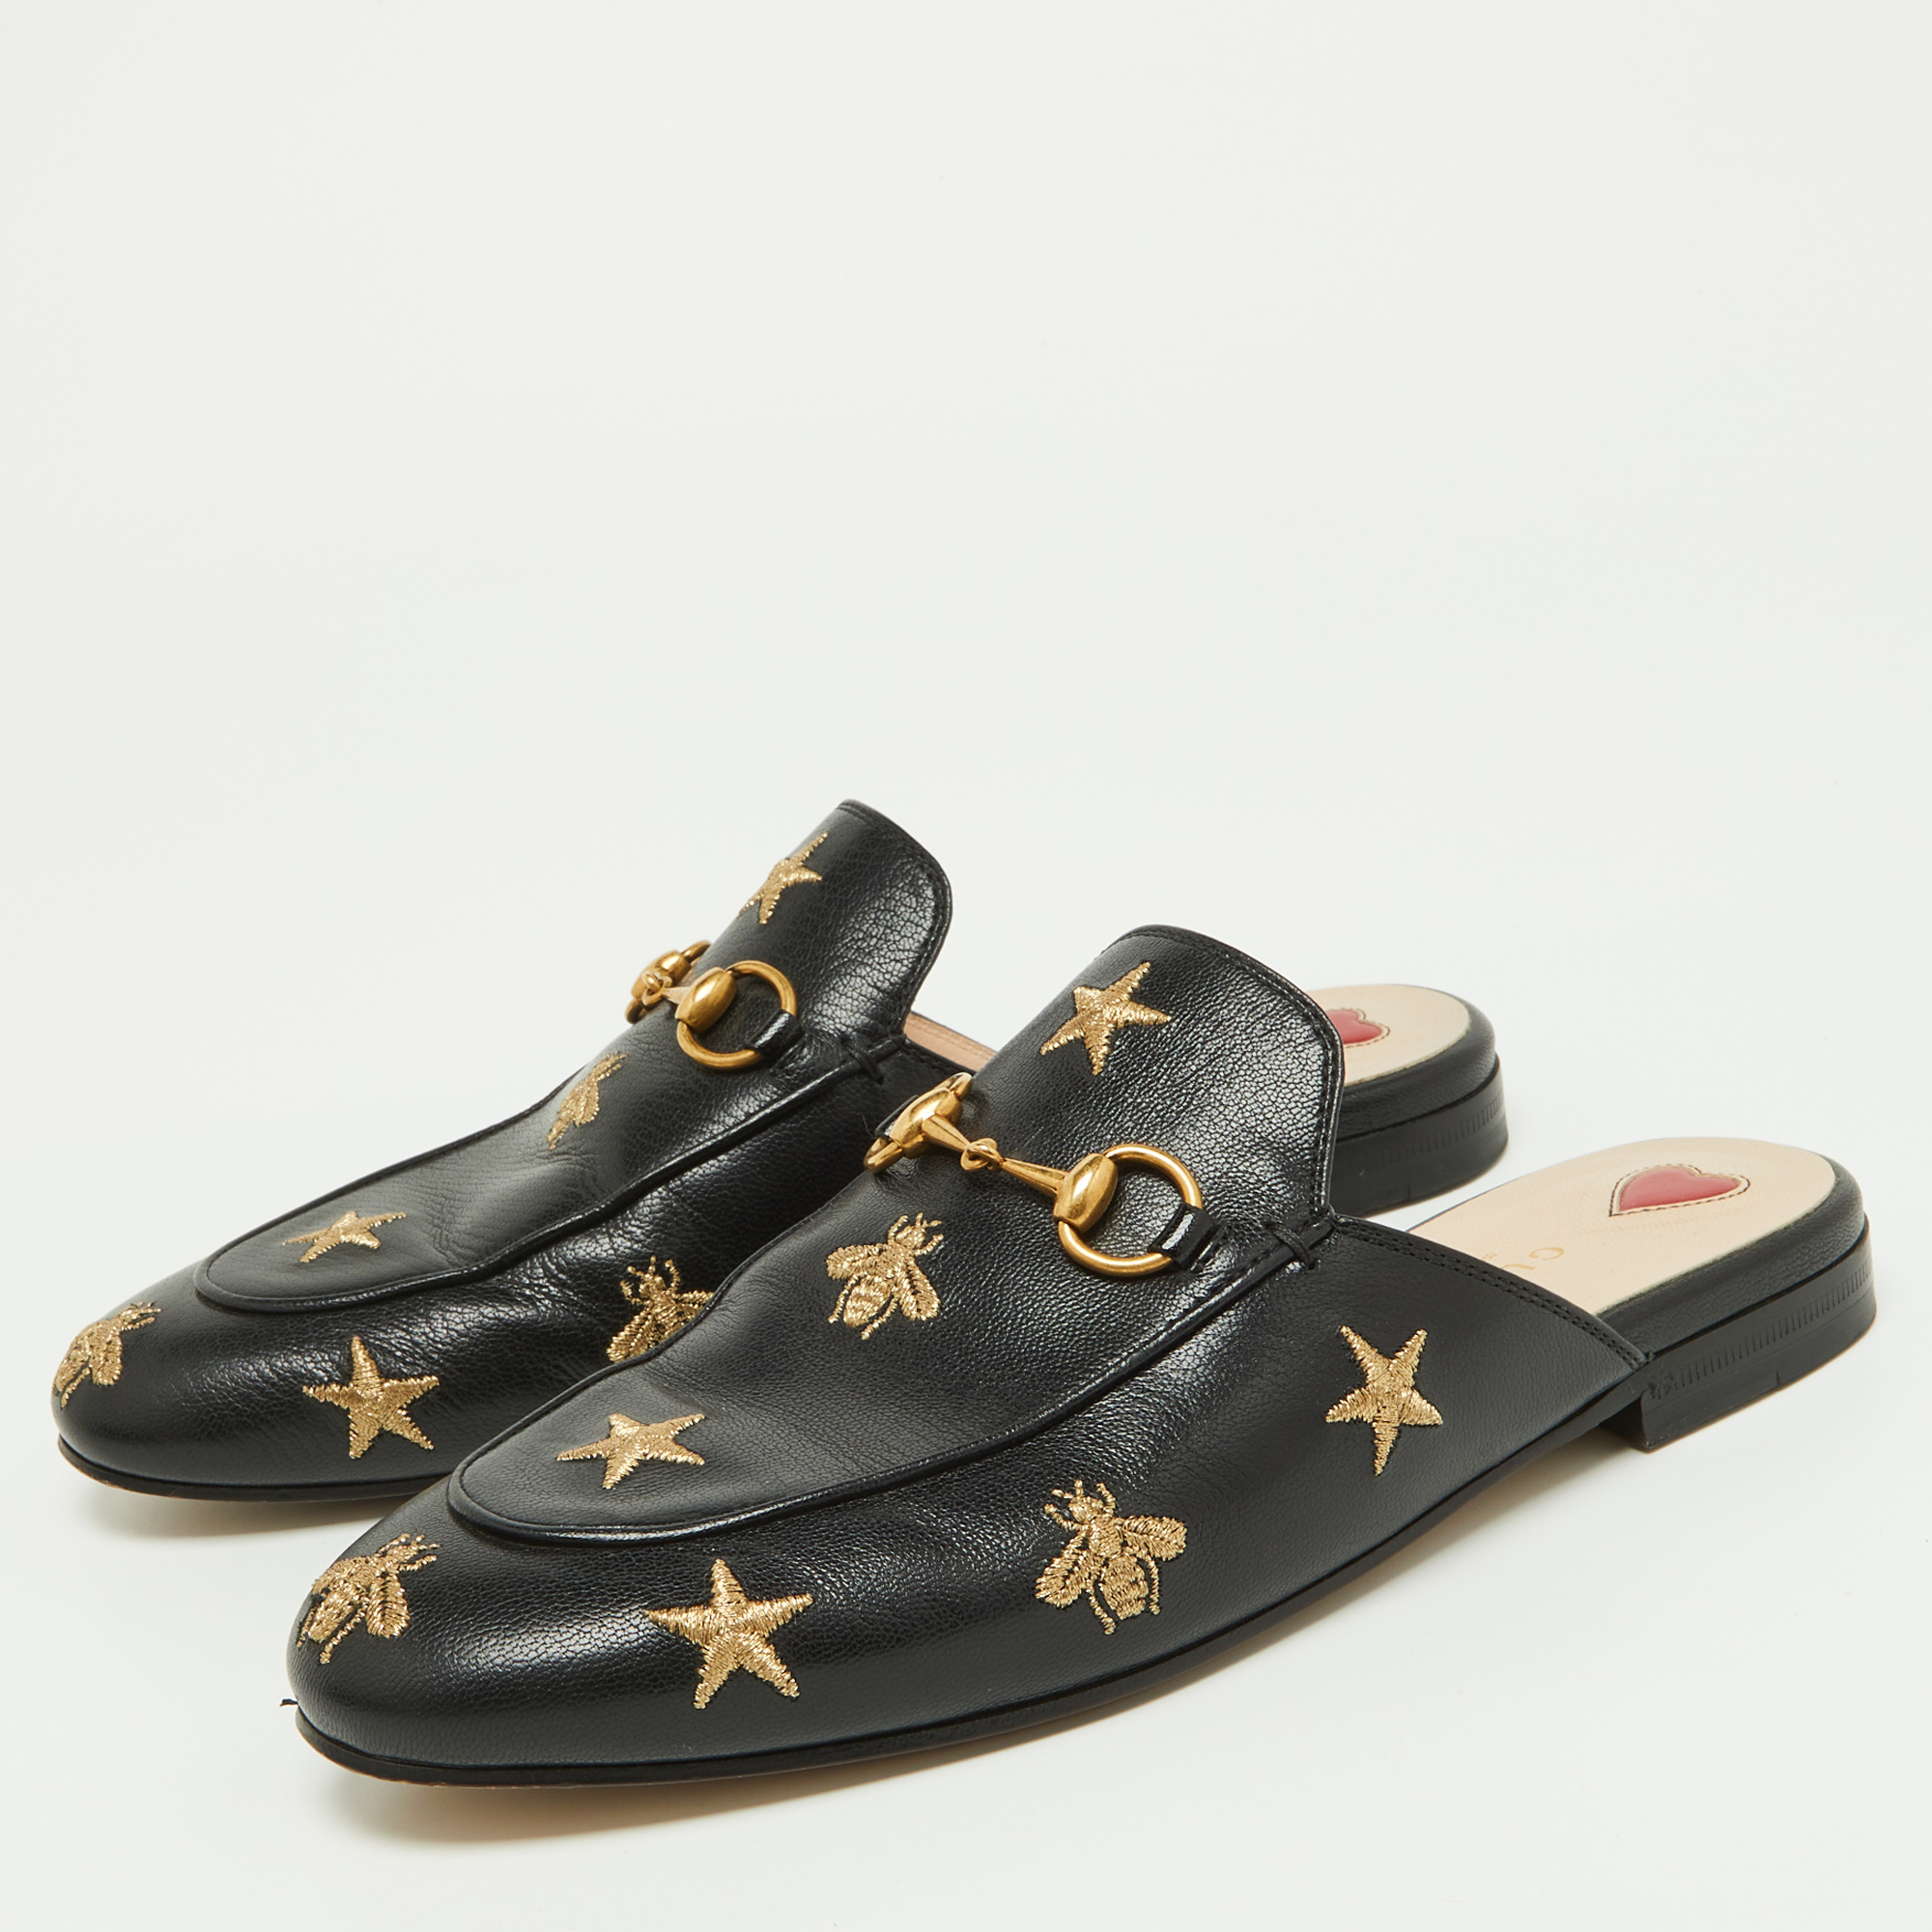 

Gucci Black/Gold Leather Bee and Star Embroidered Princetown Flat Mules Size